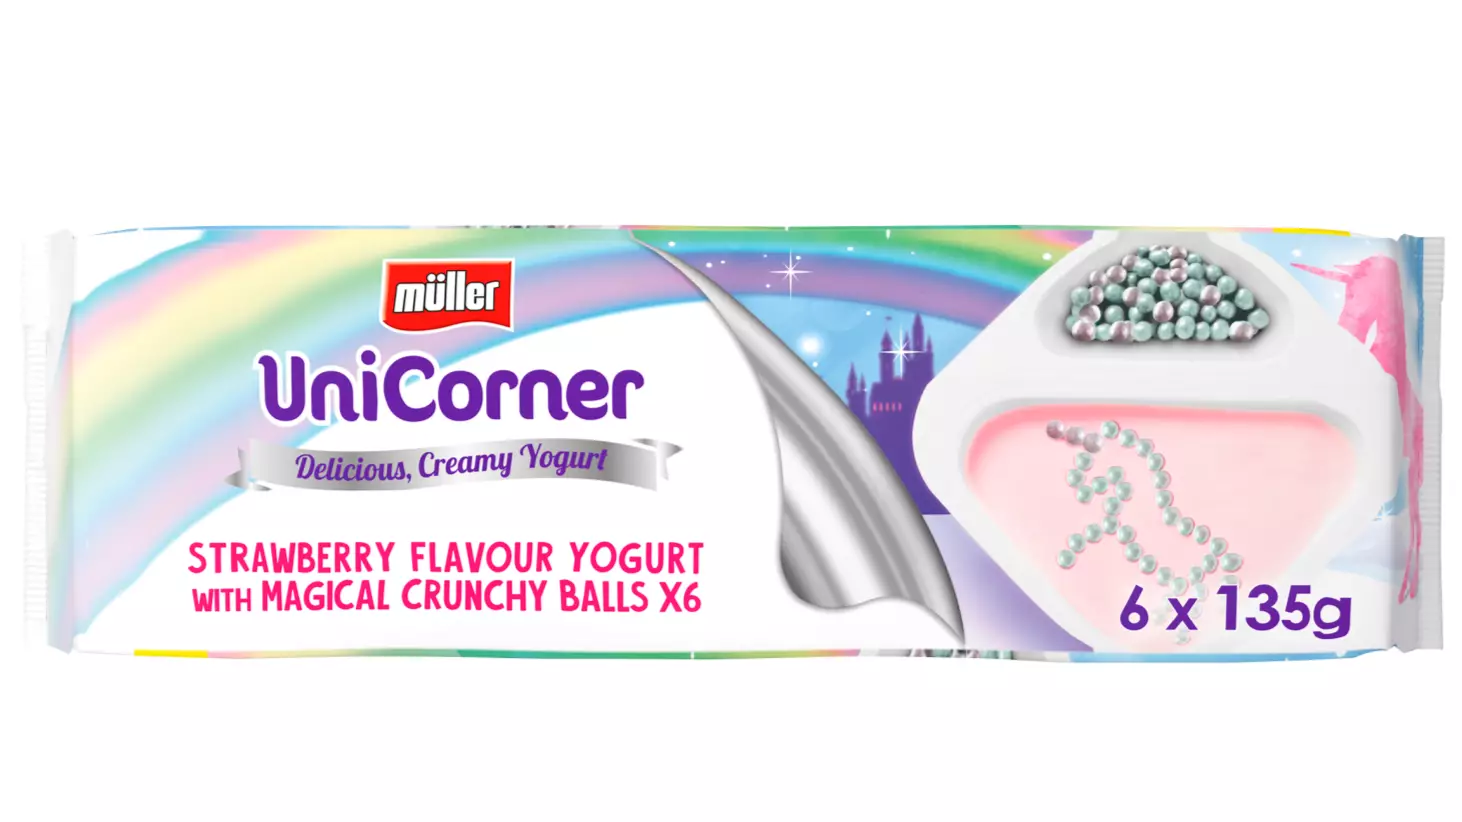 Muller Has Launched Unicorn-Inspired UniCorner Yoghurts And They Look Amazing